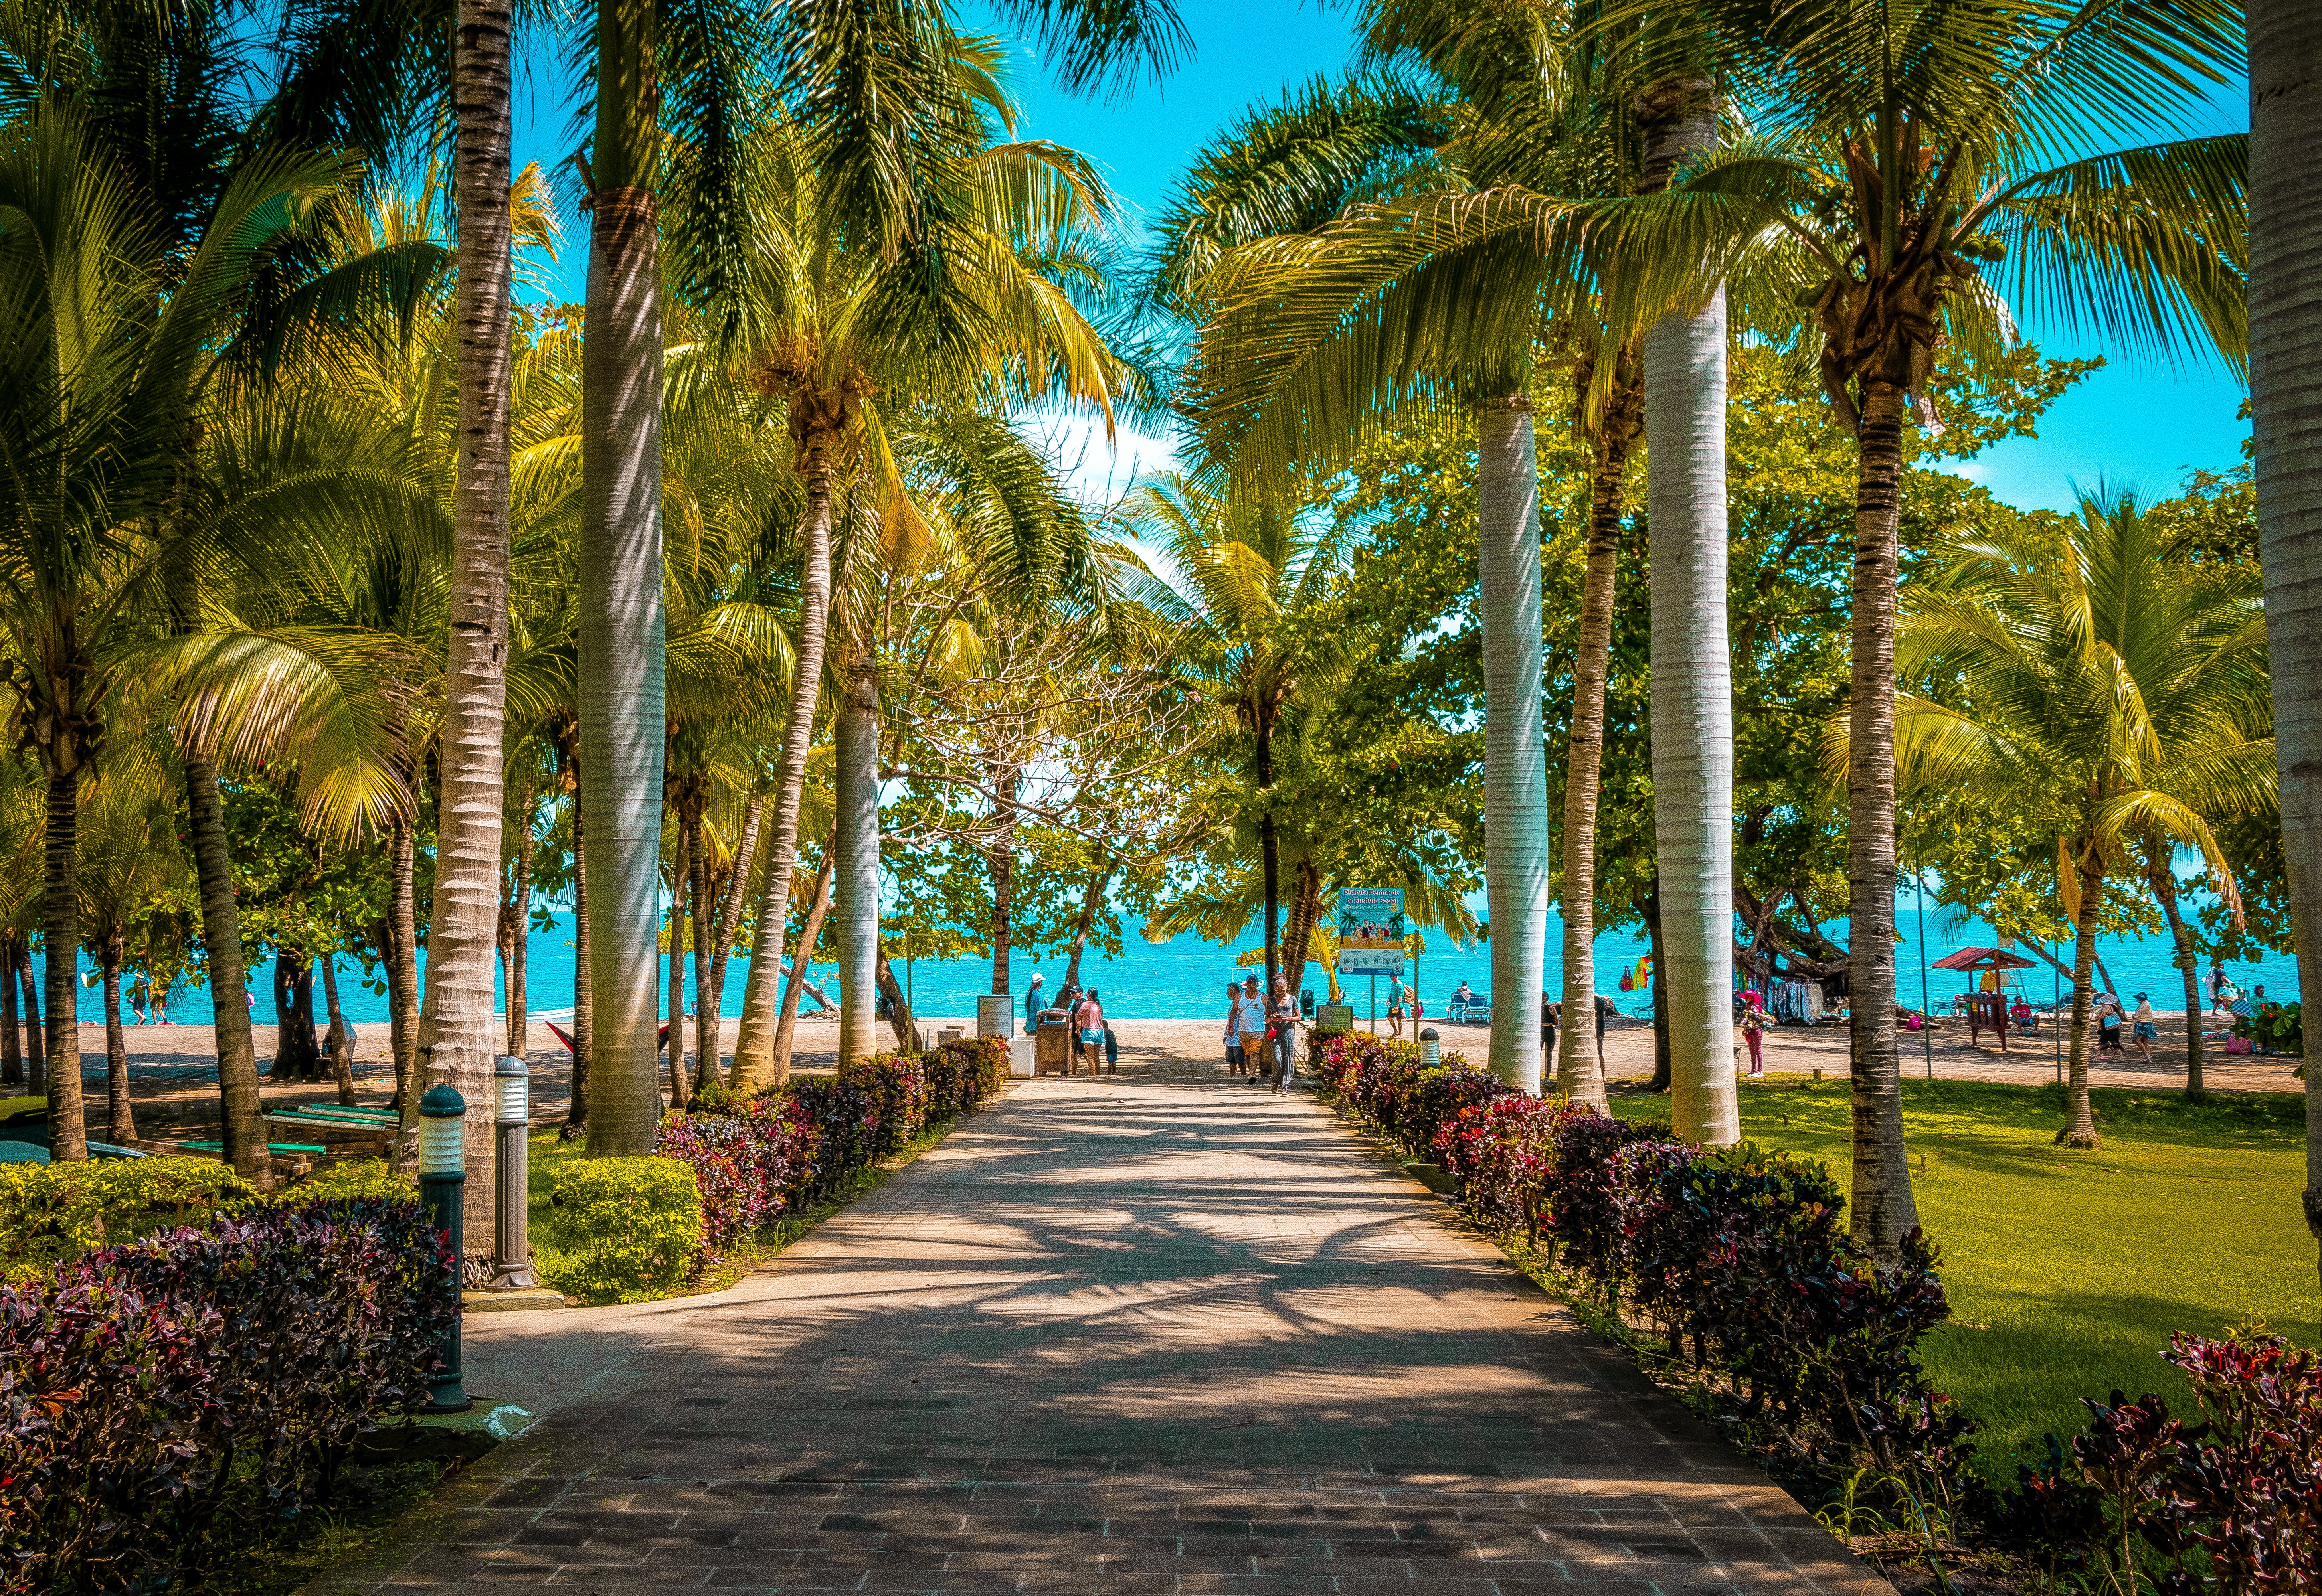 A pathway lined up with palm trees leading to the beach